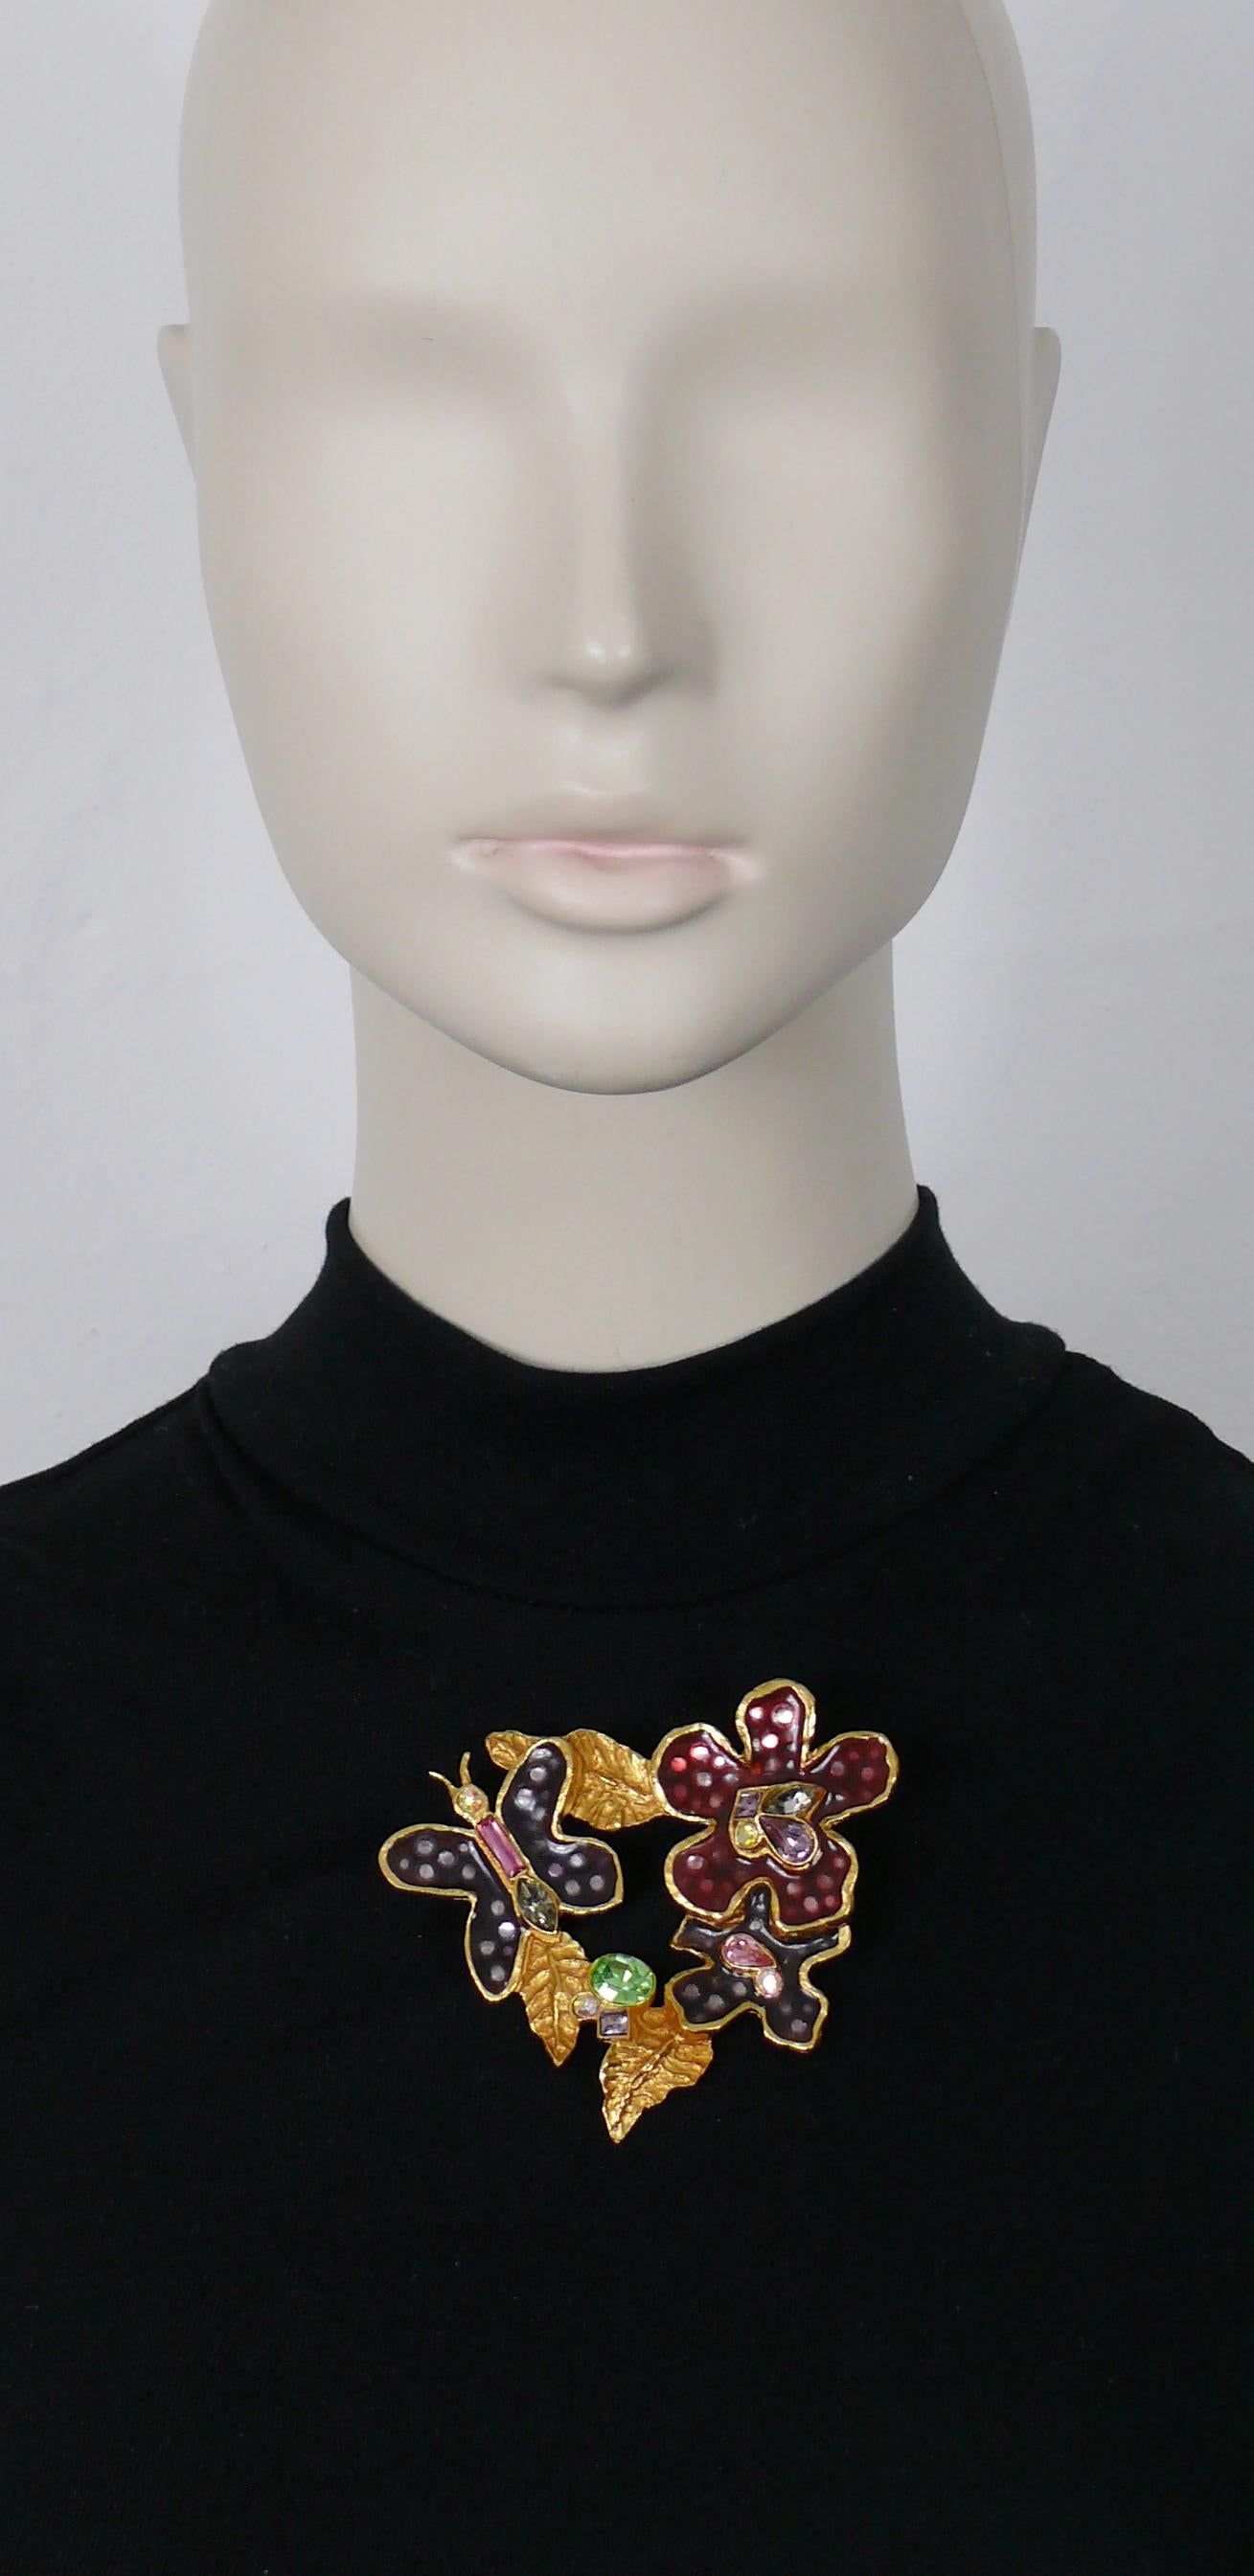 CHRISTIAN LACROIX vintage gold toned brooch featuring enameled flowers and a butterfly embellished with multicolored crystals.

Marked CHRISTIAN LACROIX CL Made in France.

Indicative measurements : max. height approx. 6.5 cm (2.56 inches) / max.